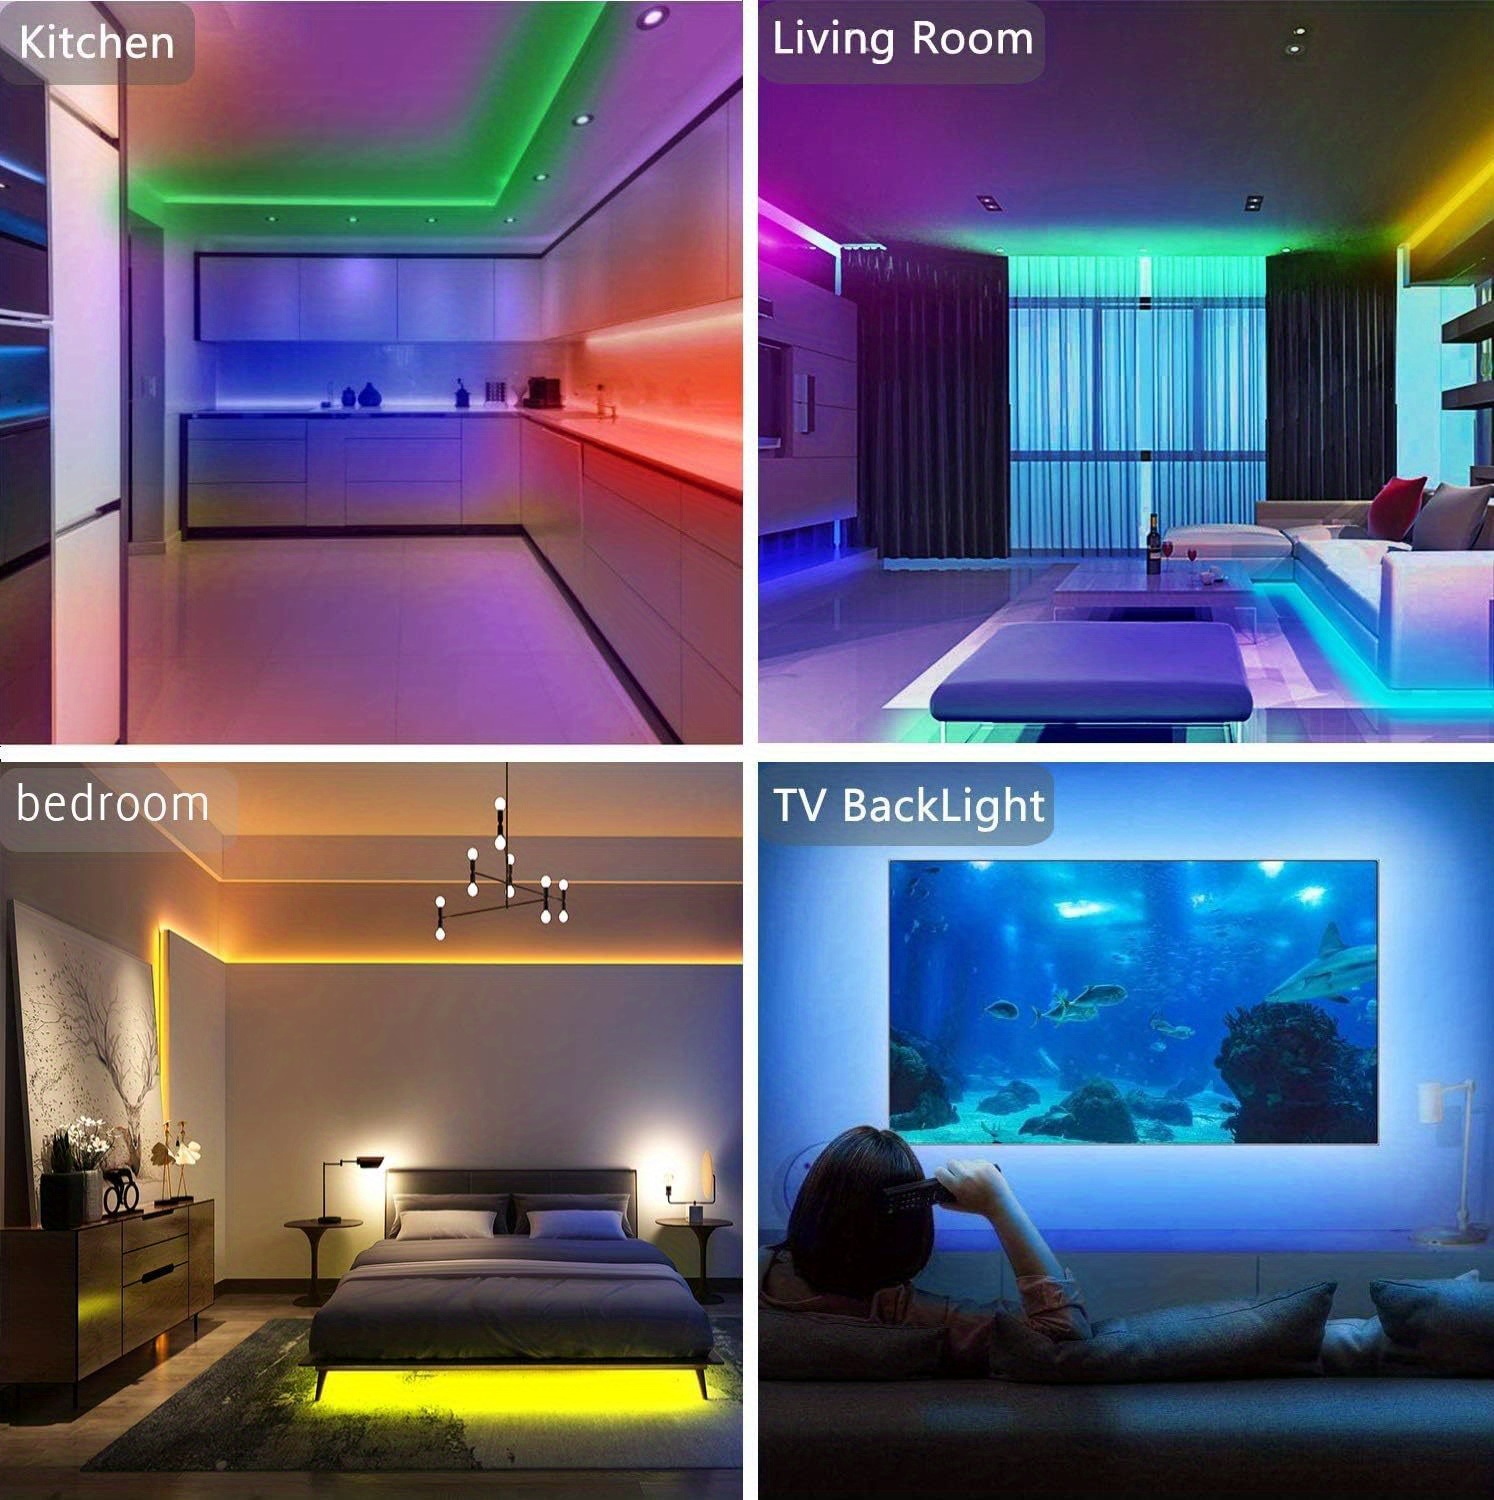 60m 200ft smart led strip light 2 rolls of 30m 100ft rgb strip light synchronized with music 44 key remote control led light used for bedroom christmas light decoration multi color 100ft deck balcony roof garden swimming pool details 4